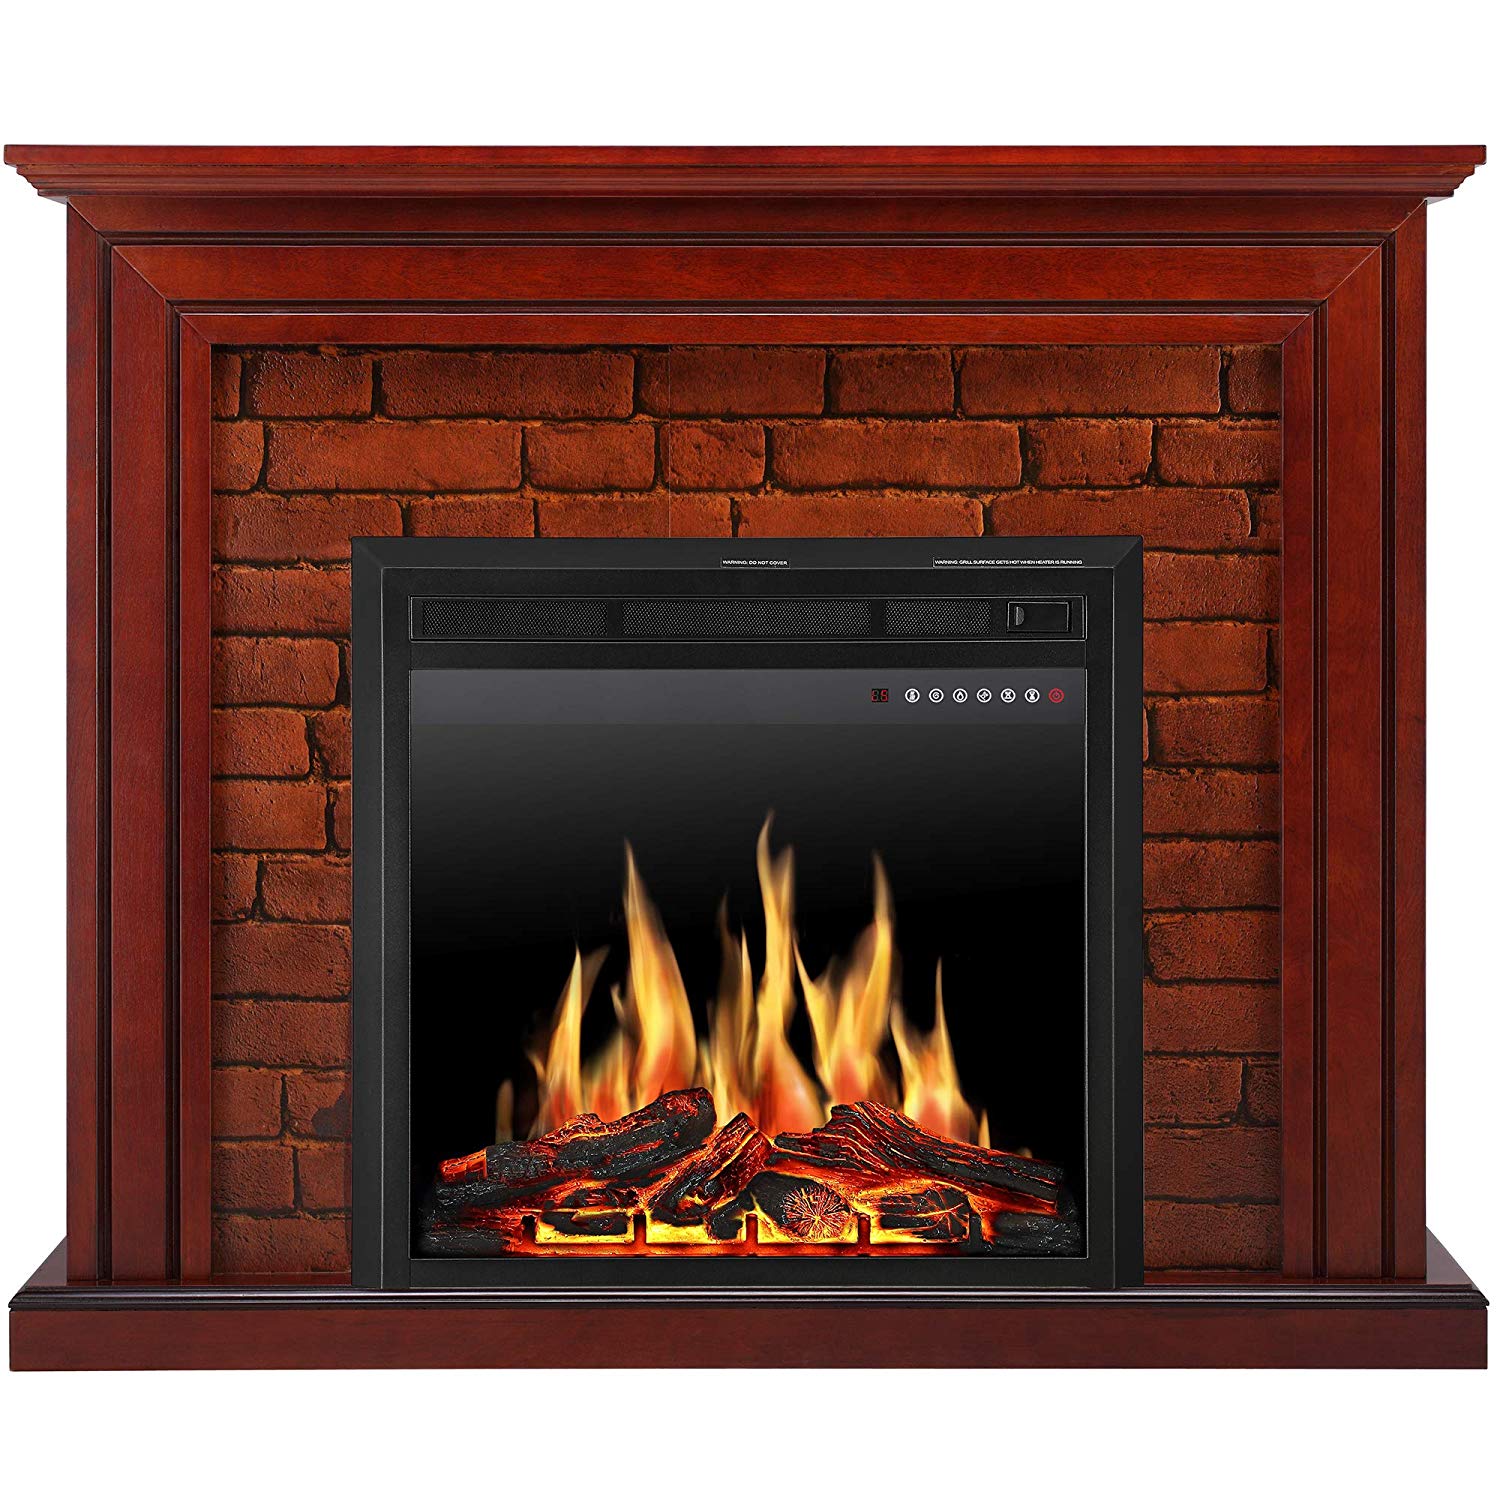 Infrared Electric Fireplace Insert Fresh Jamfly Electric Fireplace Mantel Package Traditional Brick Wall Design Heater with Remote Control and Led touch Screen Home Accent Furnishings